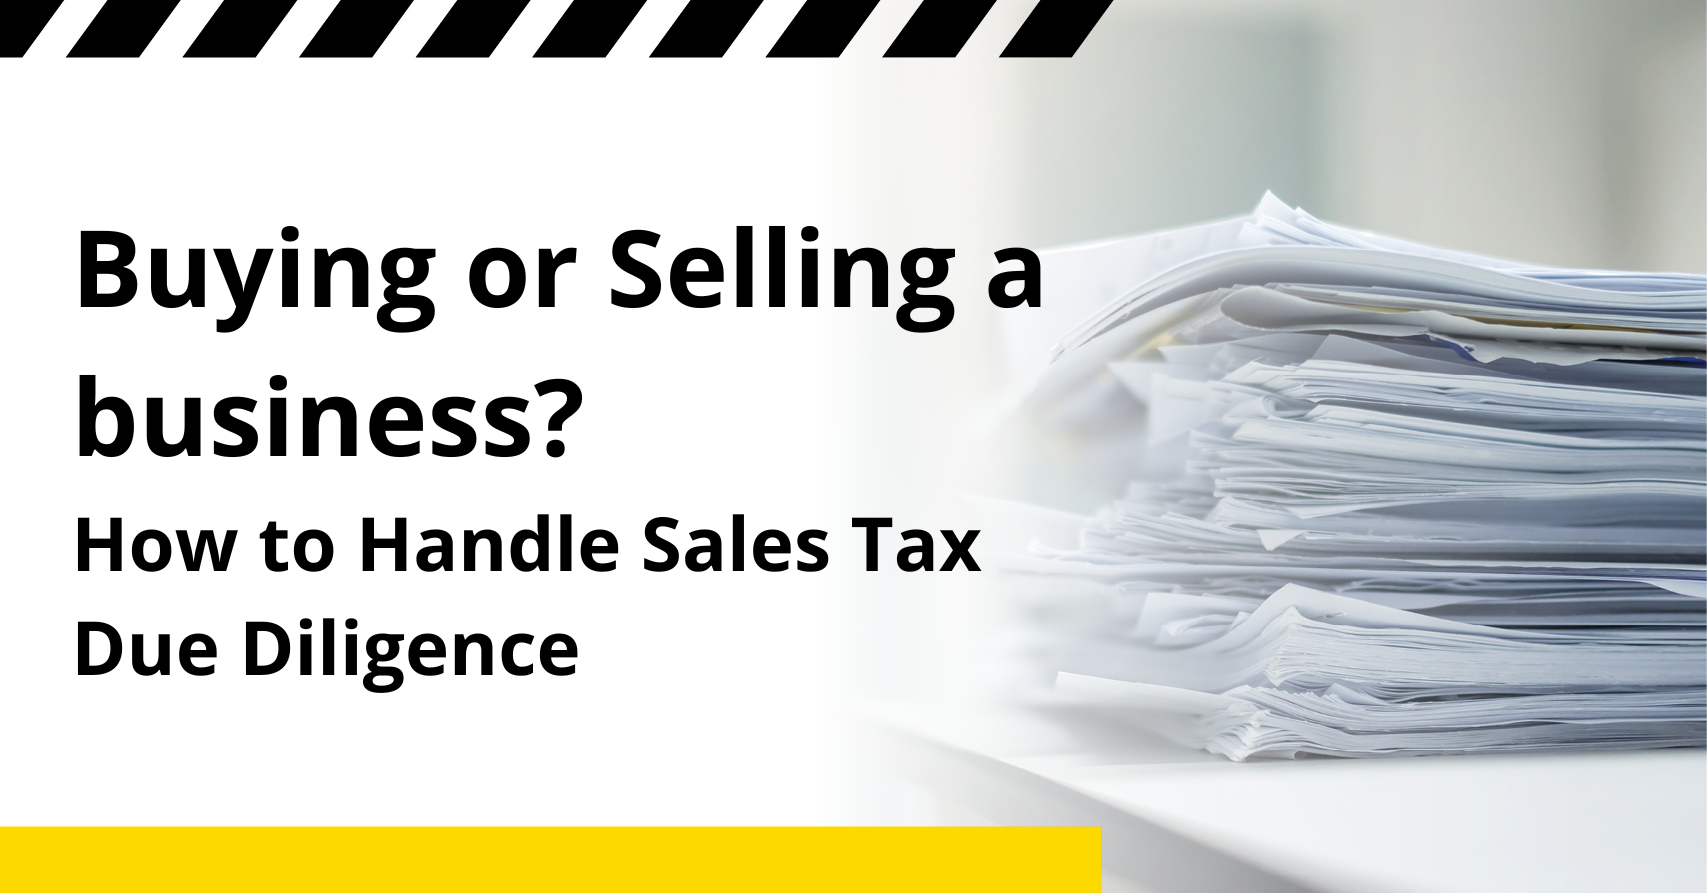 Buying or selling a business? Here's what you need to know about how to correctly conduct sales tax due diligence.